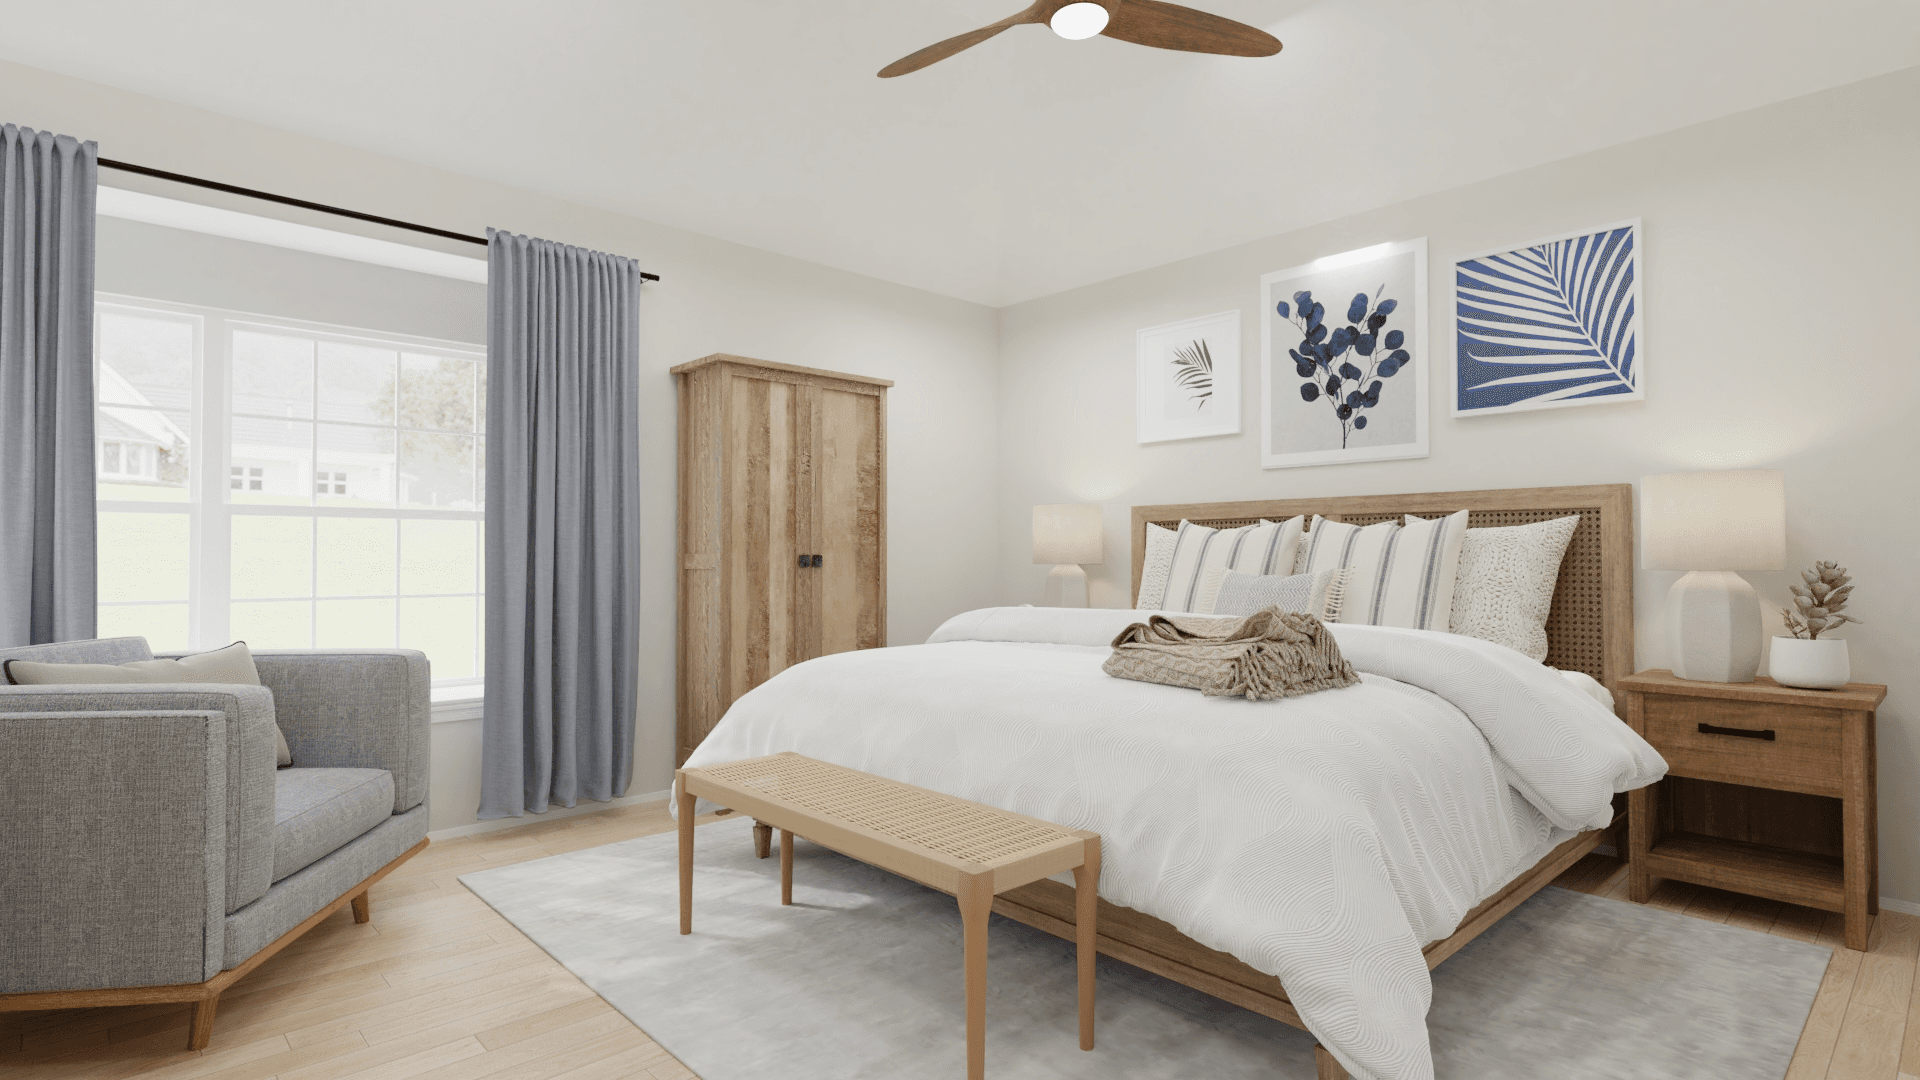 Transitional Coastal Bedroom With Wooden Amoire